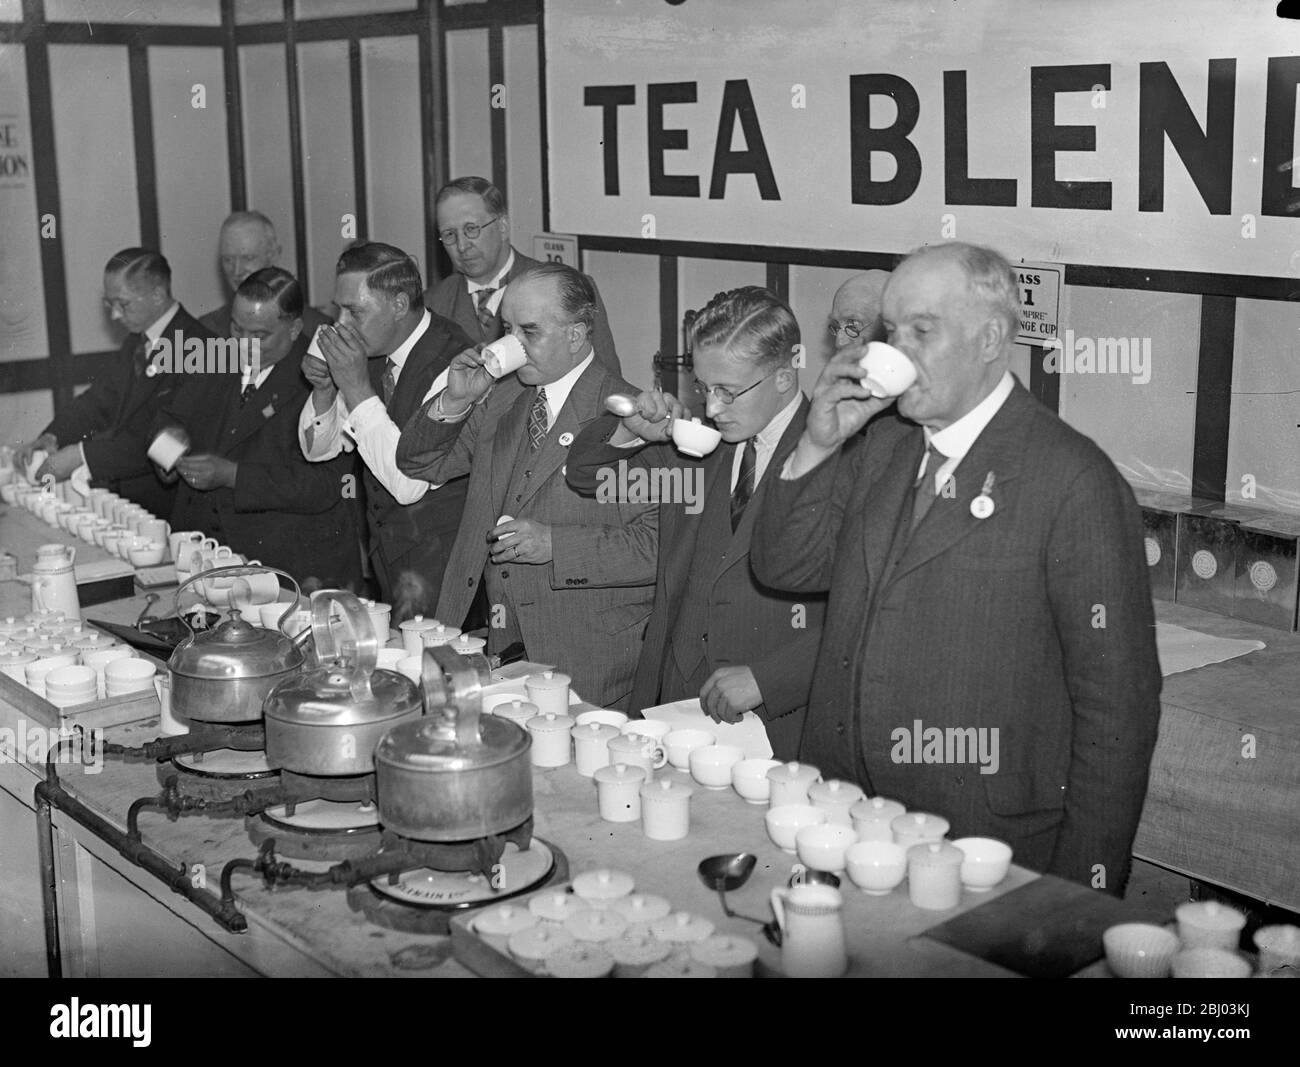 Tea blending competition at grocers exhibition . - The tea blending opens to masters , managers and assistance for ' The Grocer ' Challenge Cup is in progress at the Grocers Exhibition , Royal Agricultural Hall , Islington . - Photo shows , the tea blending competition in progress . - 21 September 1936 Stock Photo